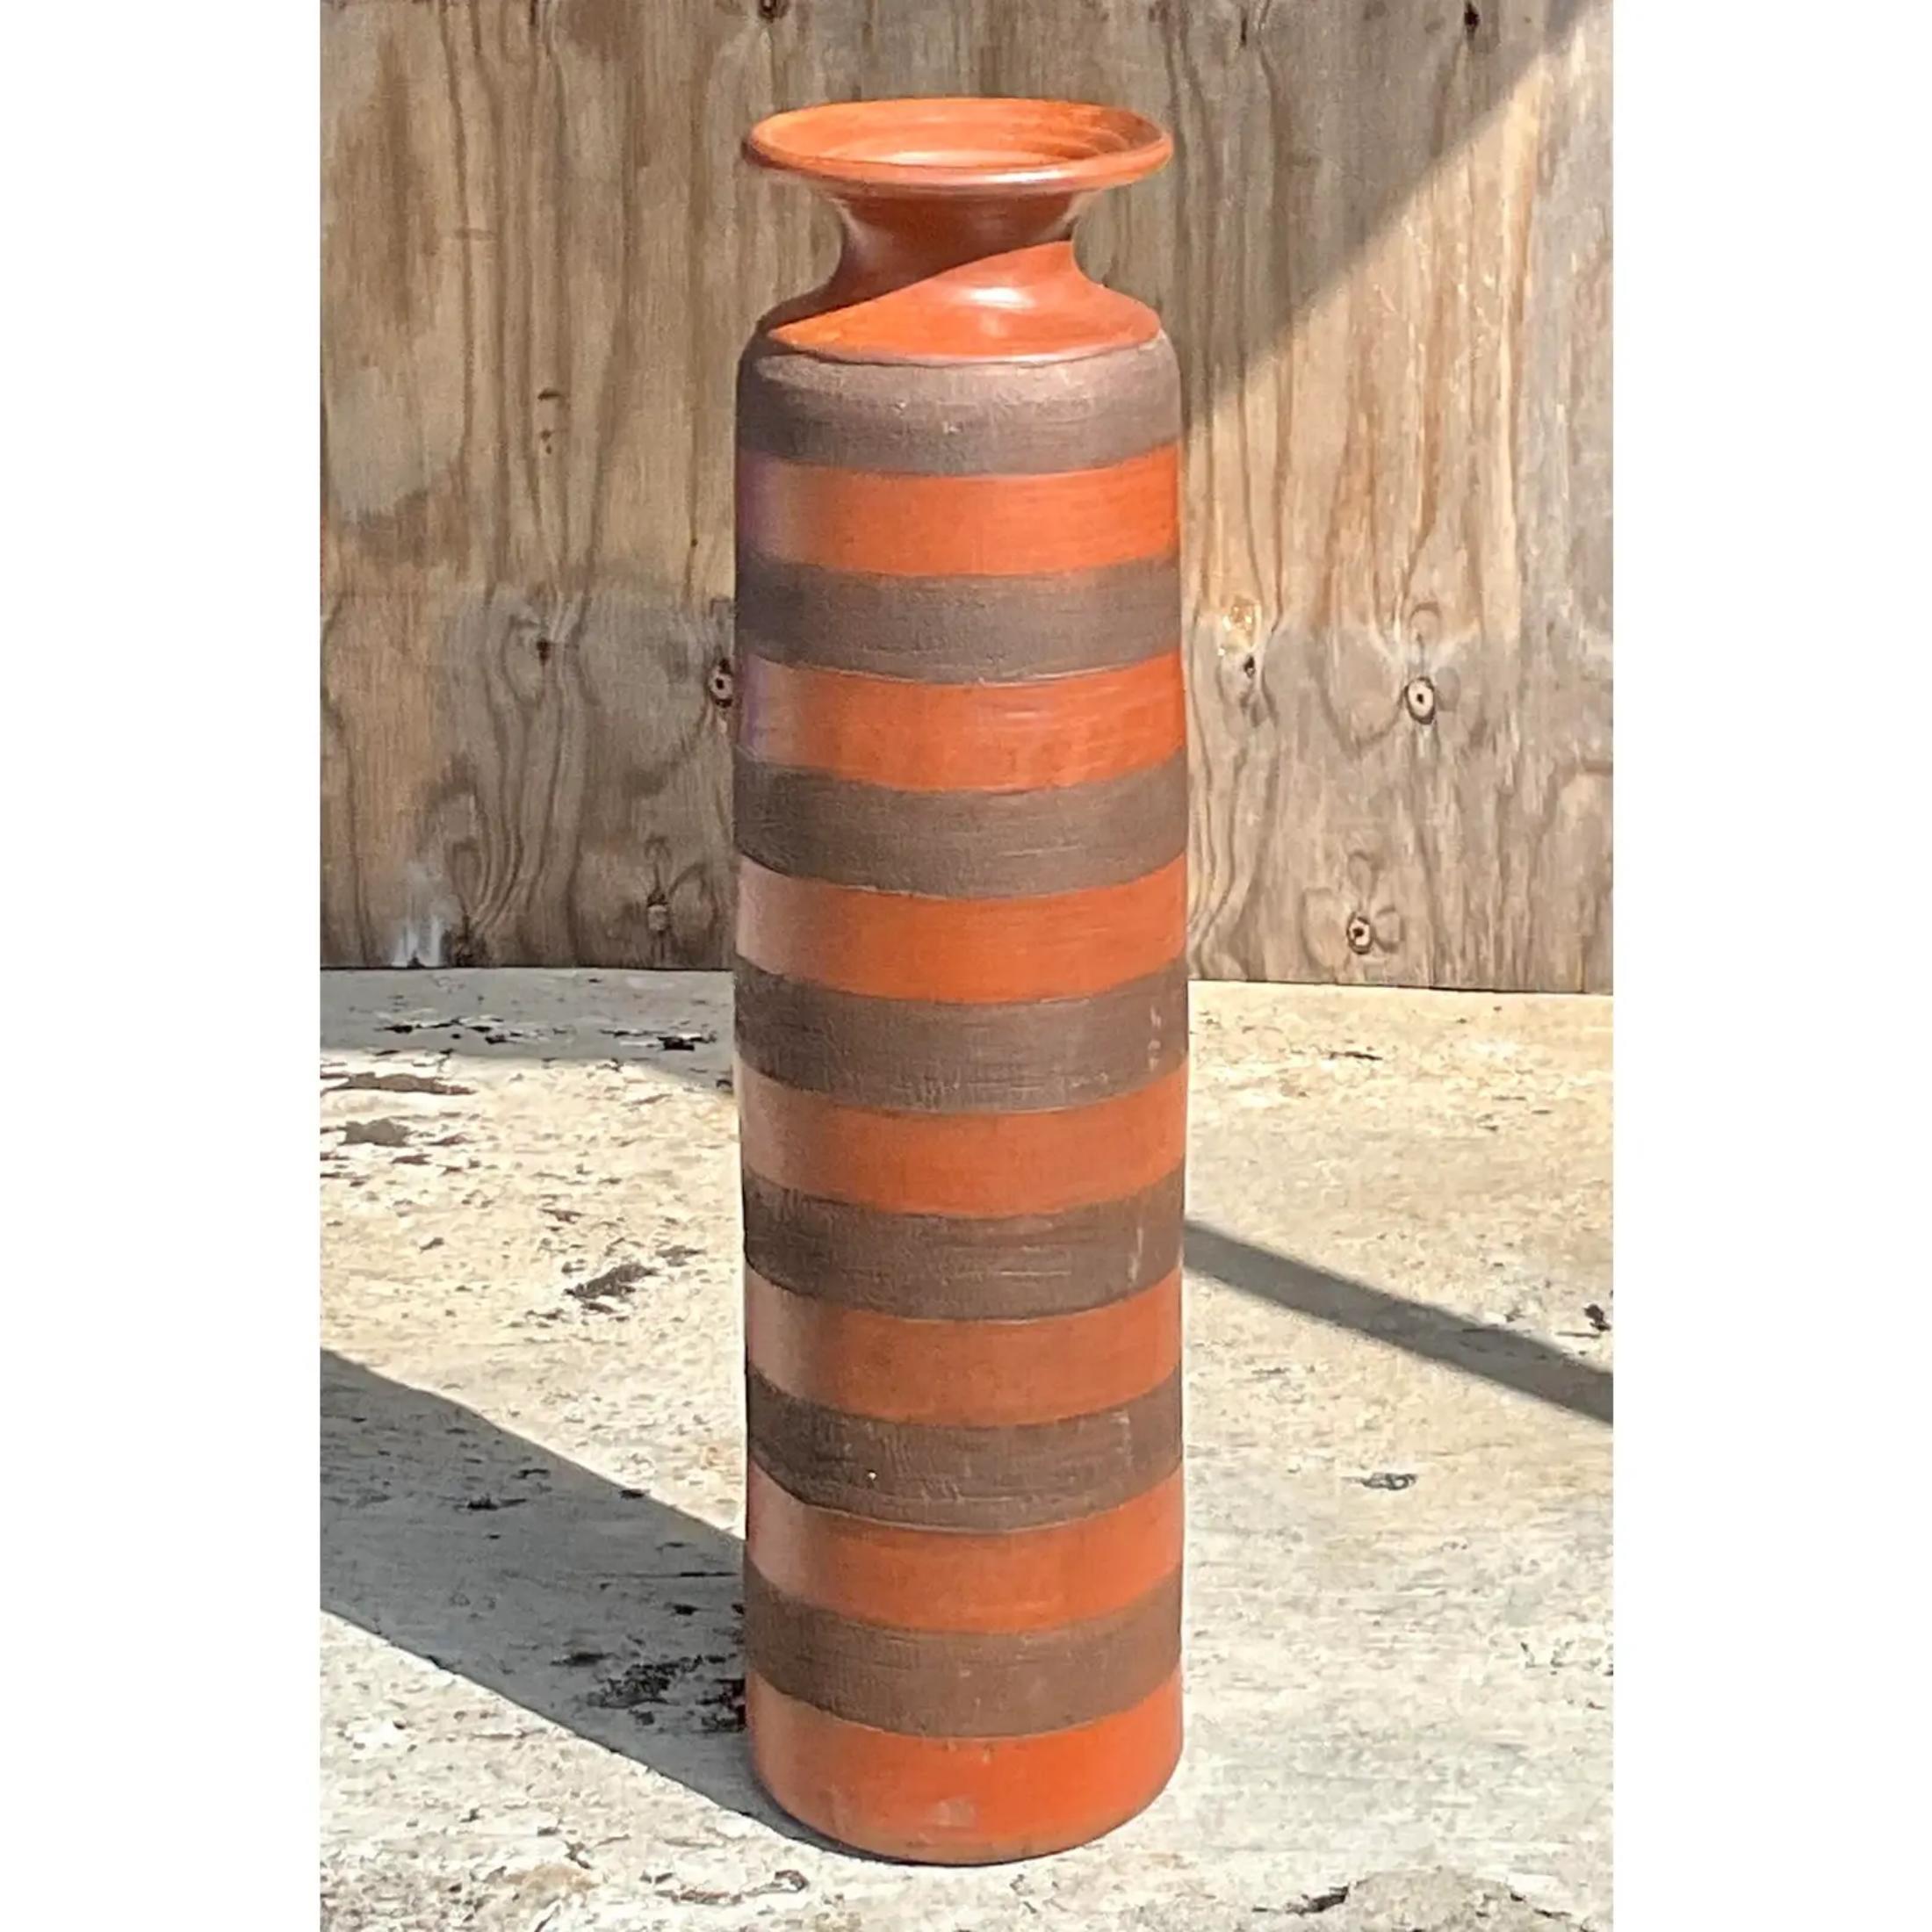 Fabulous vintage large pottery floor vase. Chic striped design in rich warm color. Tall and impressive. Acquired from a Palm Beach estate.